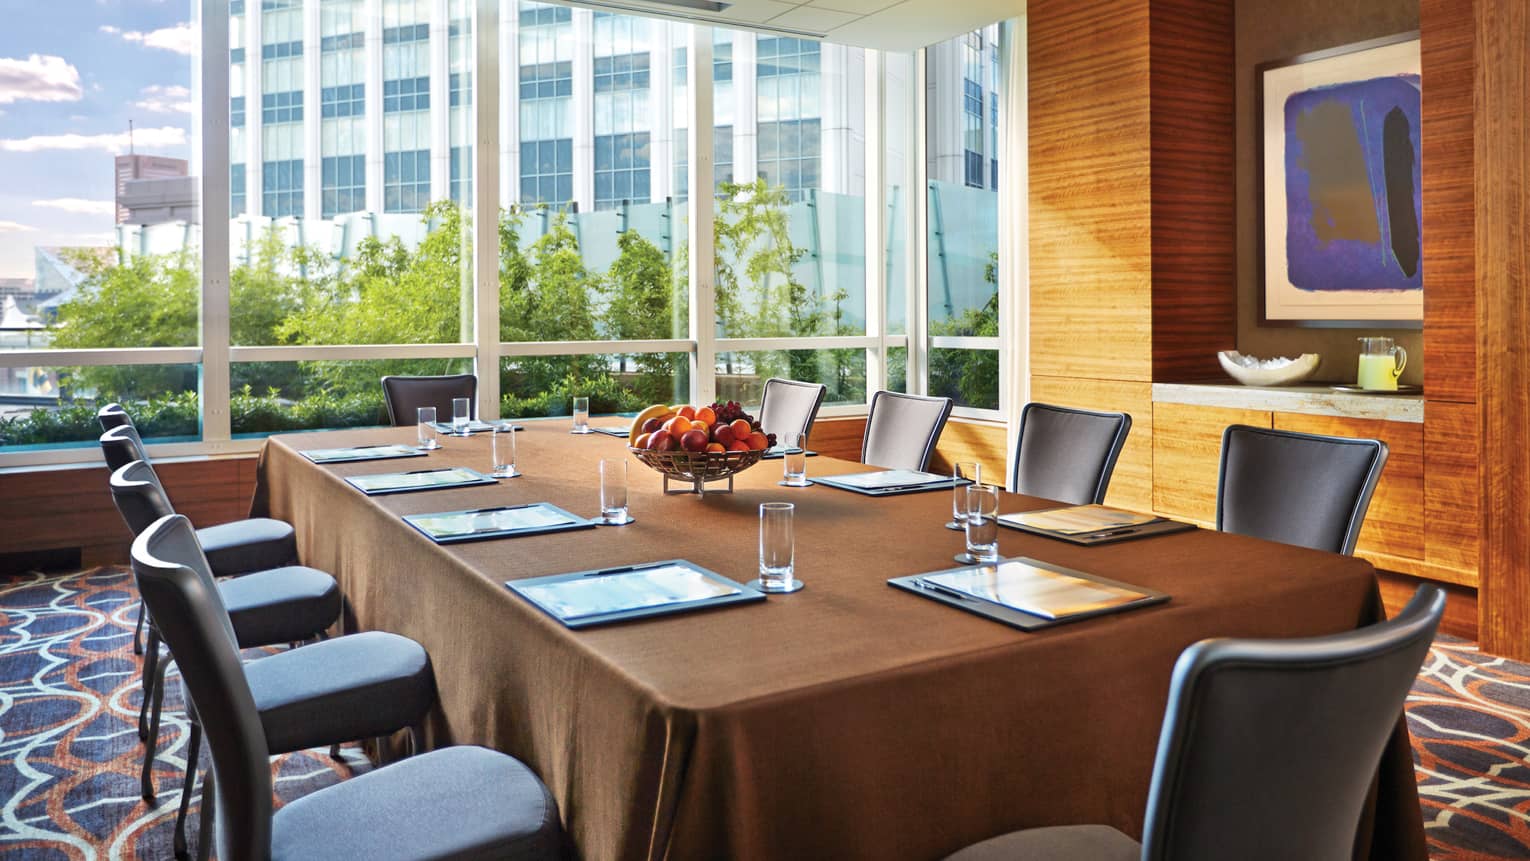 Large rectangular boardroom meeting table by bright floor-to-ceiling window